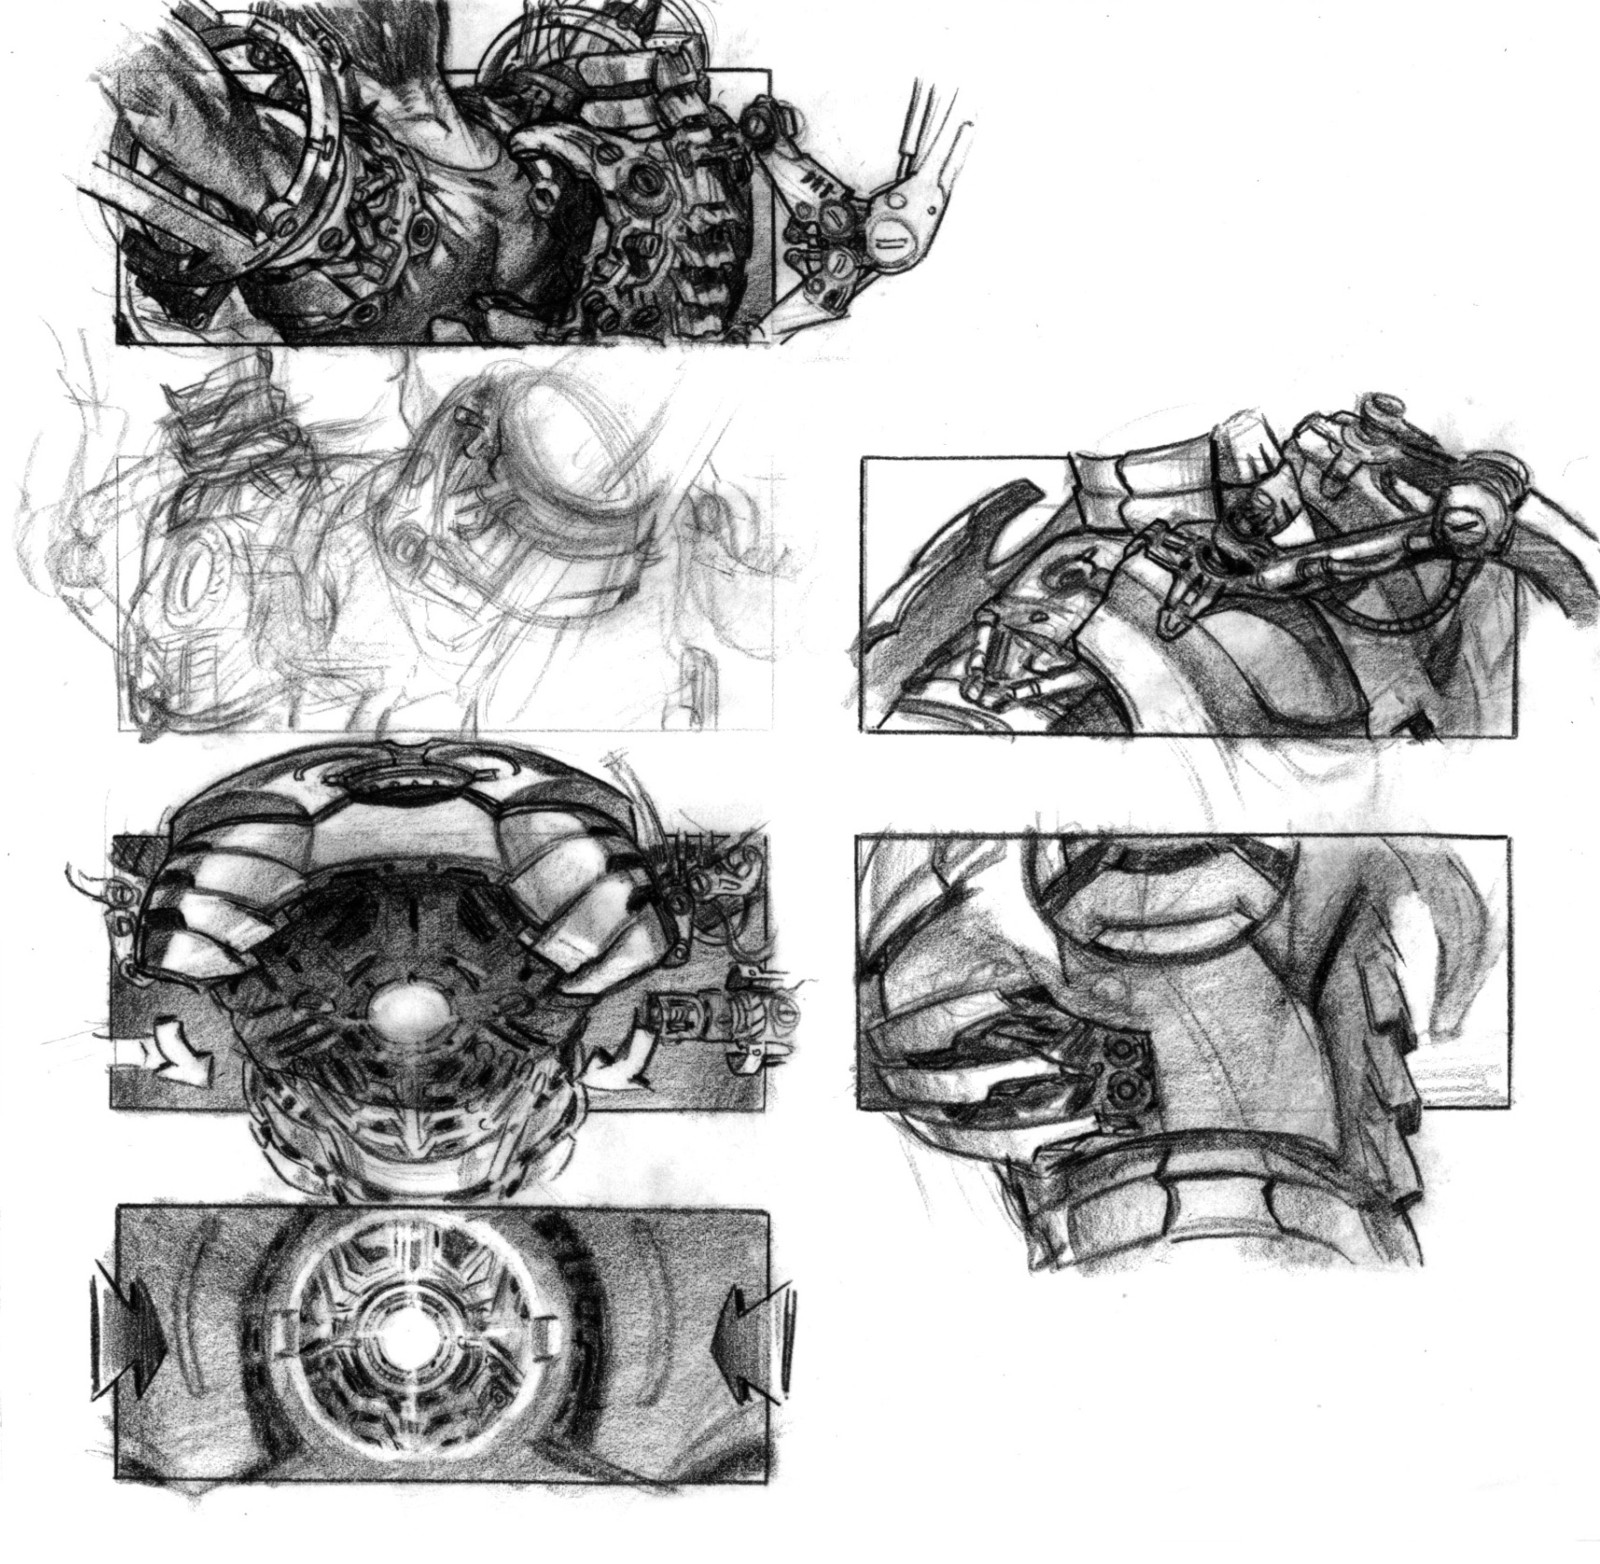 Suiting-up storyboards showing potential key shots in the suit-up sequence.(Pencil on vellum)